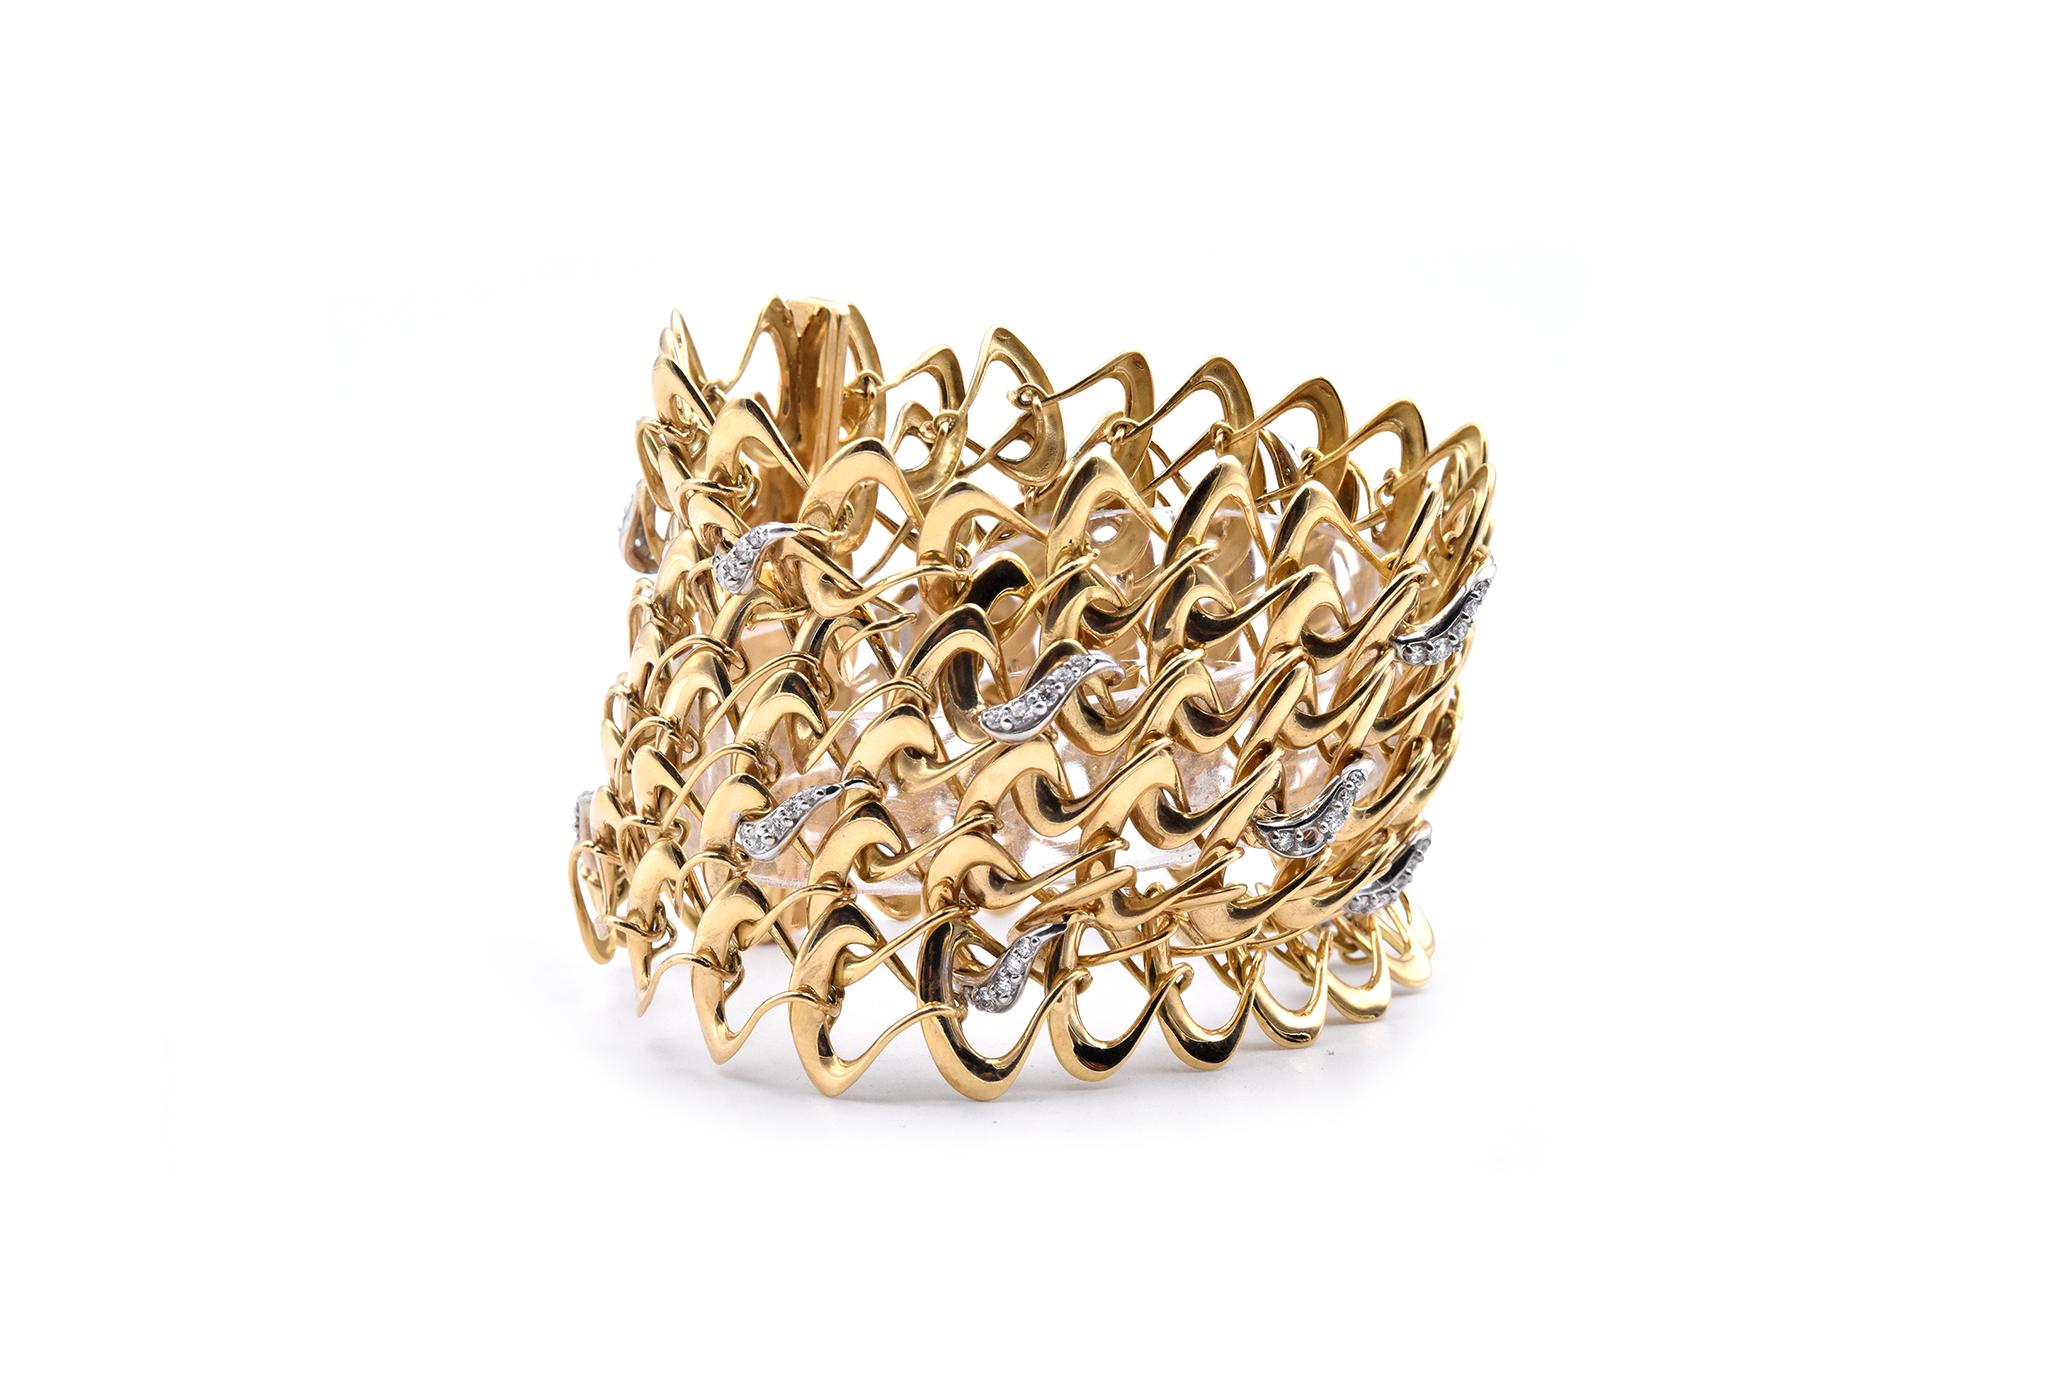 Material: 18K yellow gold 
Diamonds:  70 round cut = 1.40cttw
Color: G
Clarity: VS
Dimensions: bracelet measures 7.25-inches long, 2-inches wide
Weight: 85.45 grams
